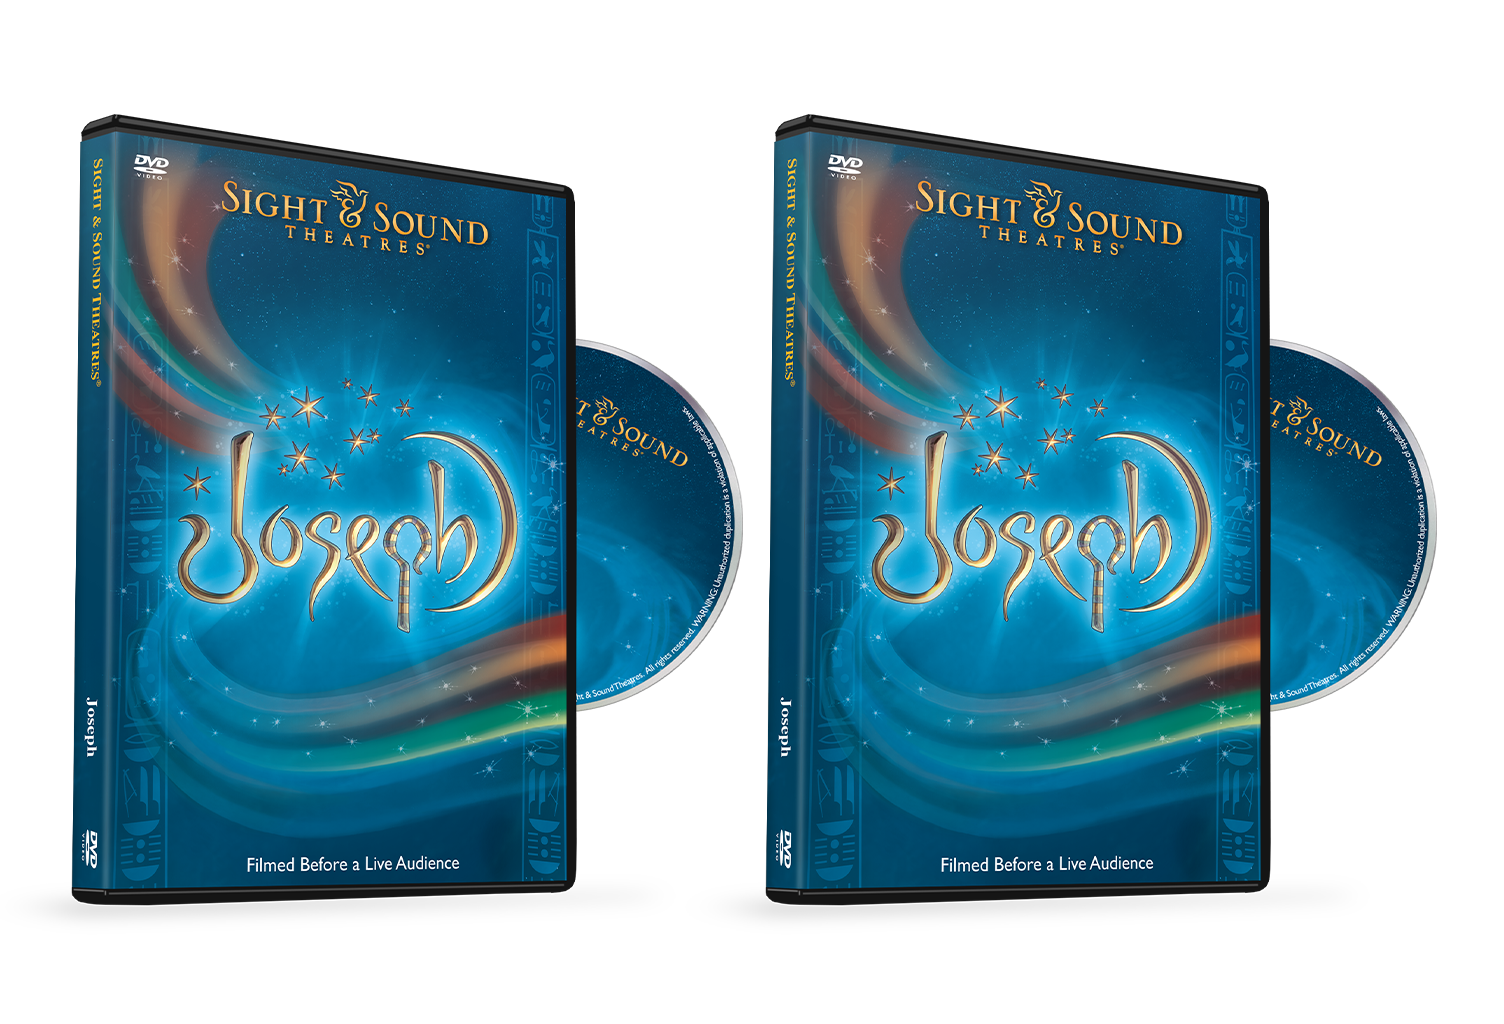 Sight and Sounds Theatres - Joseph on TBN